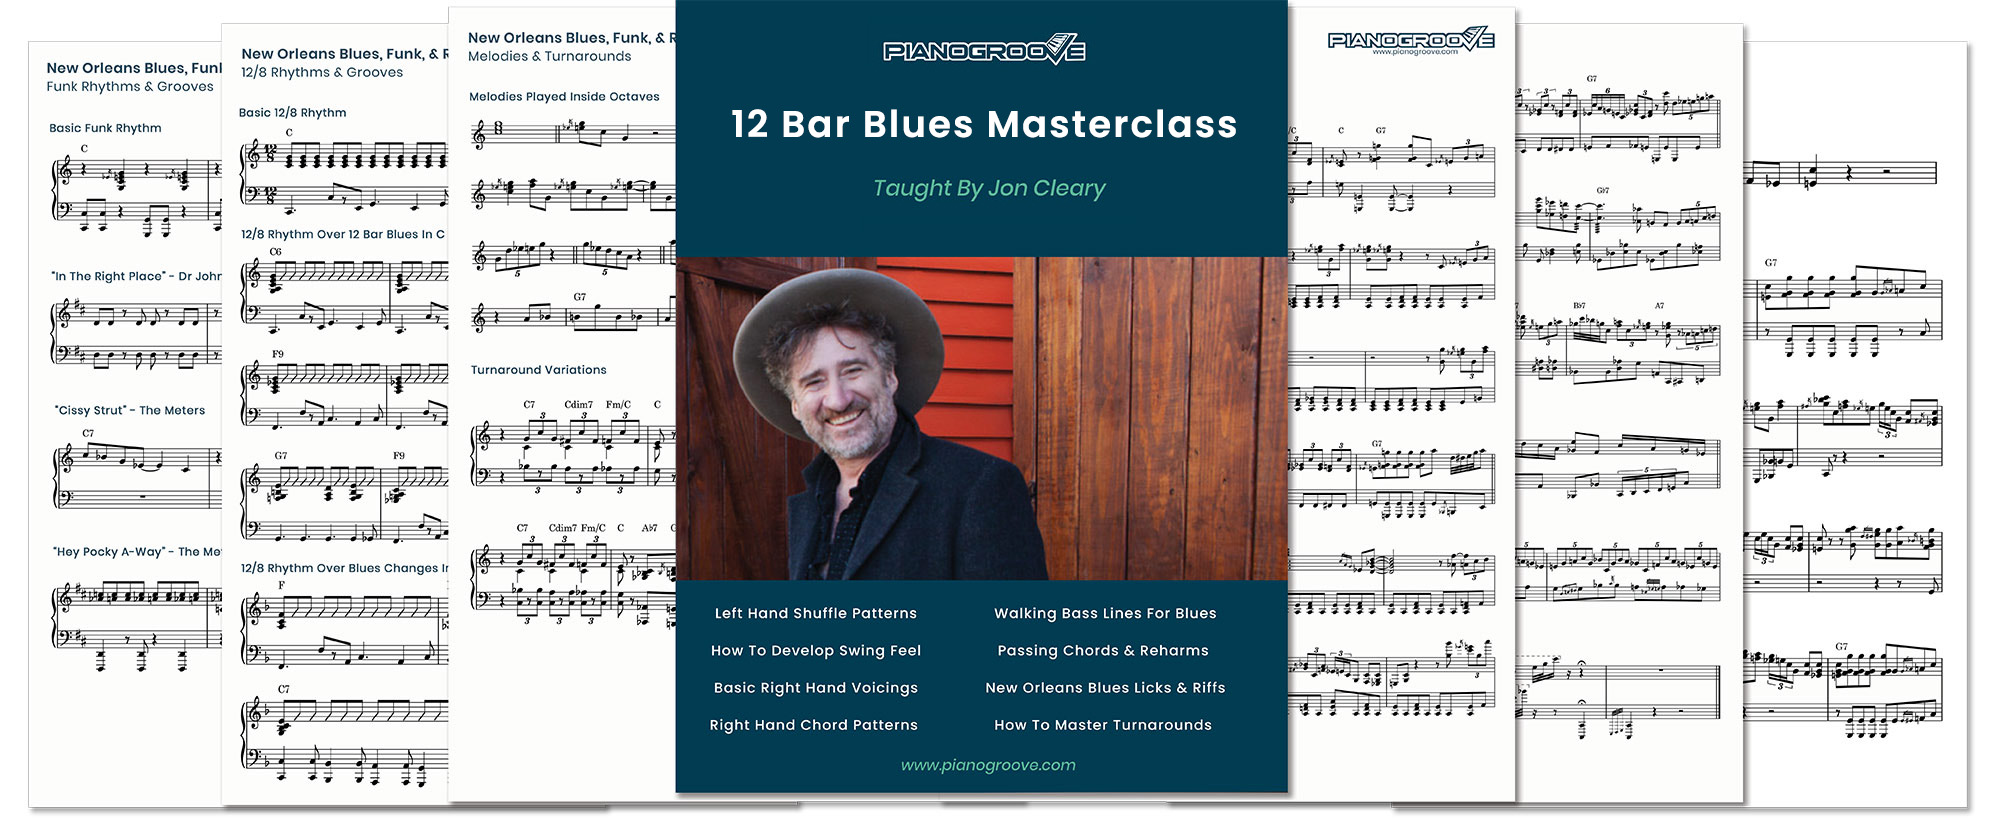 Jon Cleary Piano Lessons